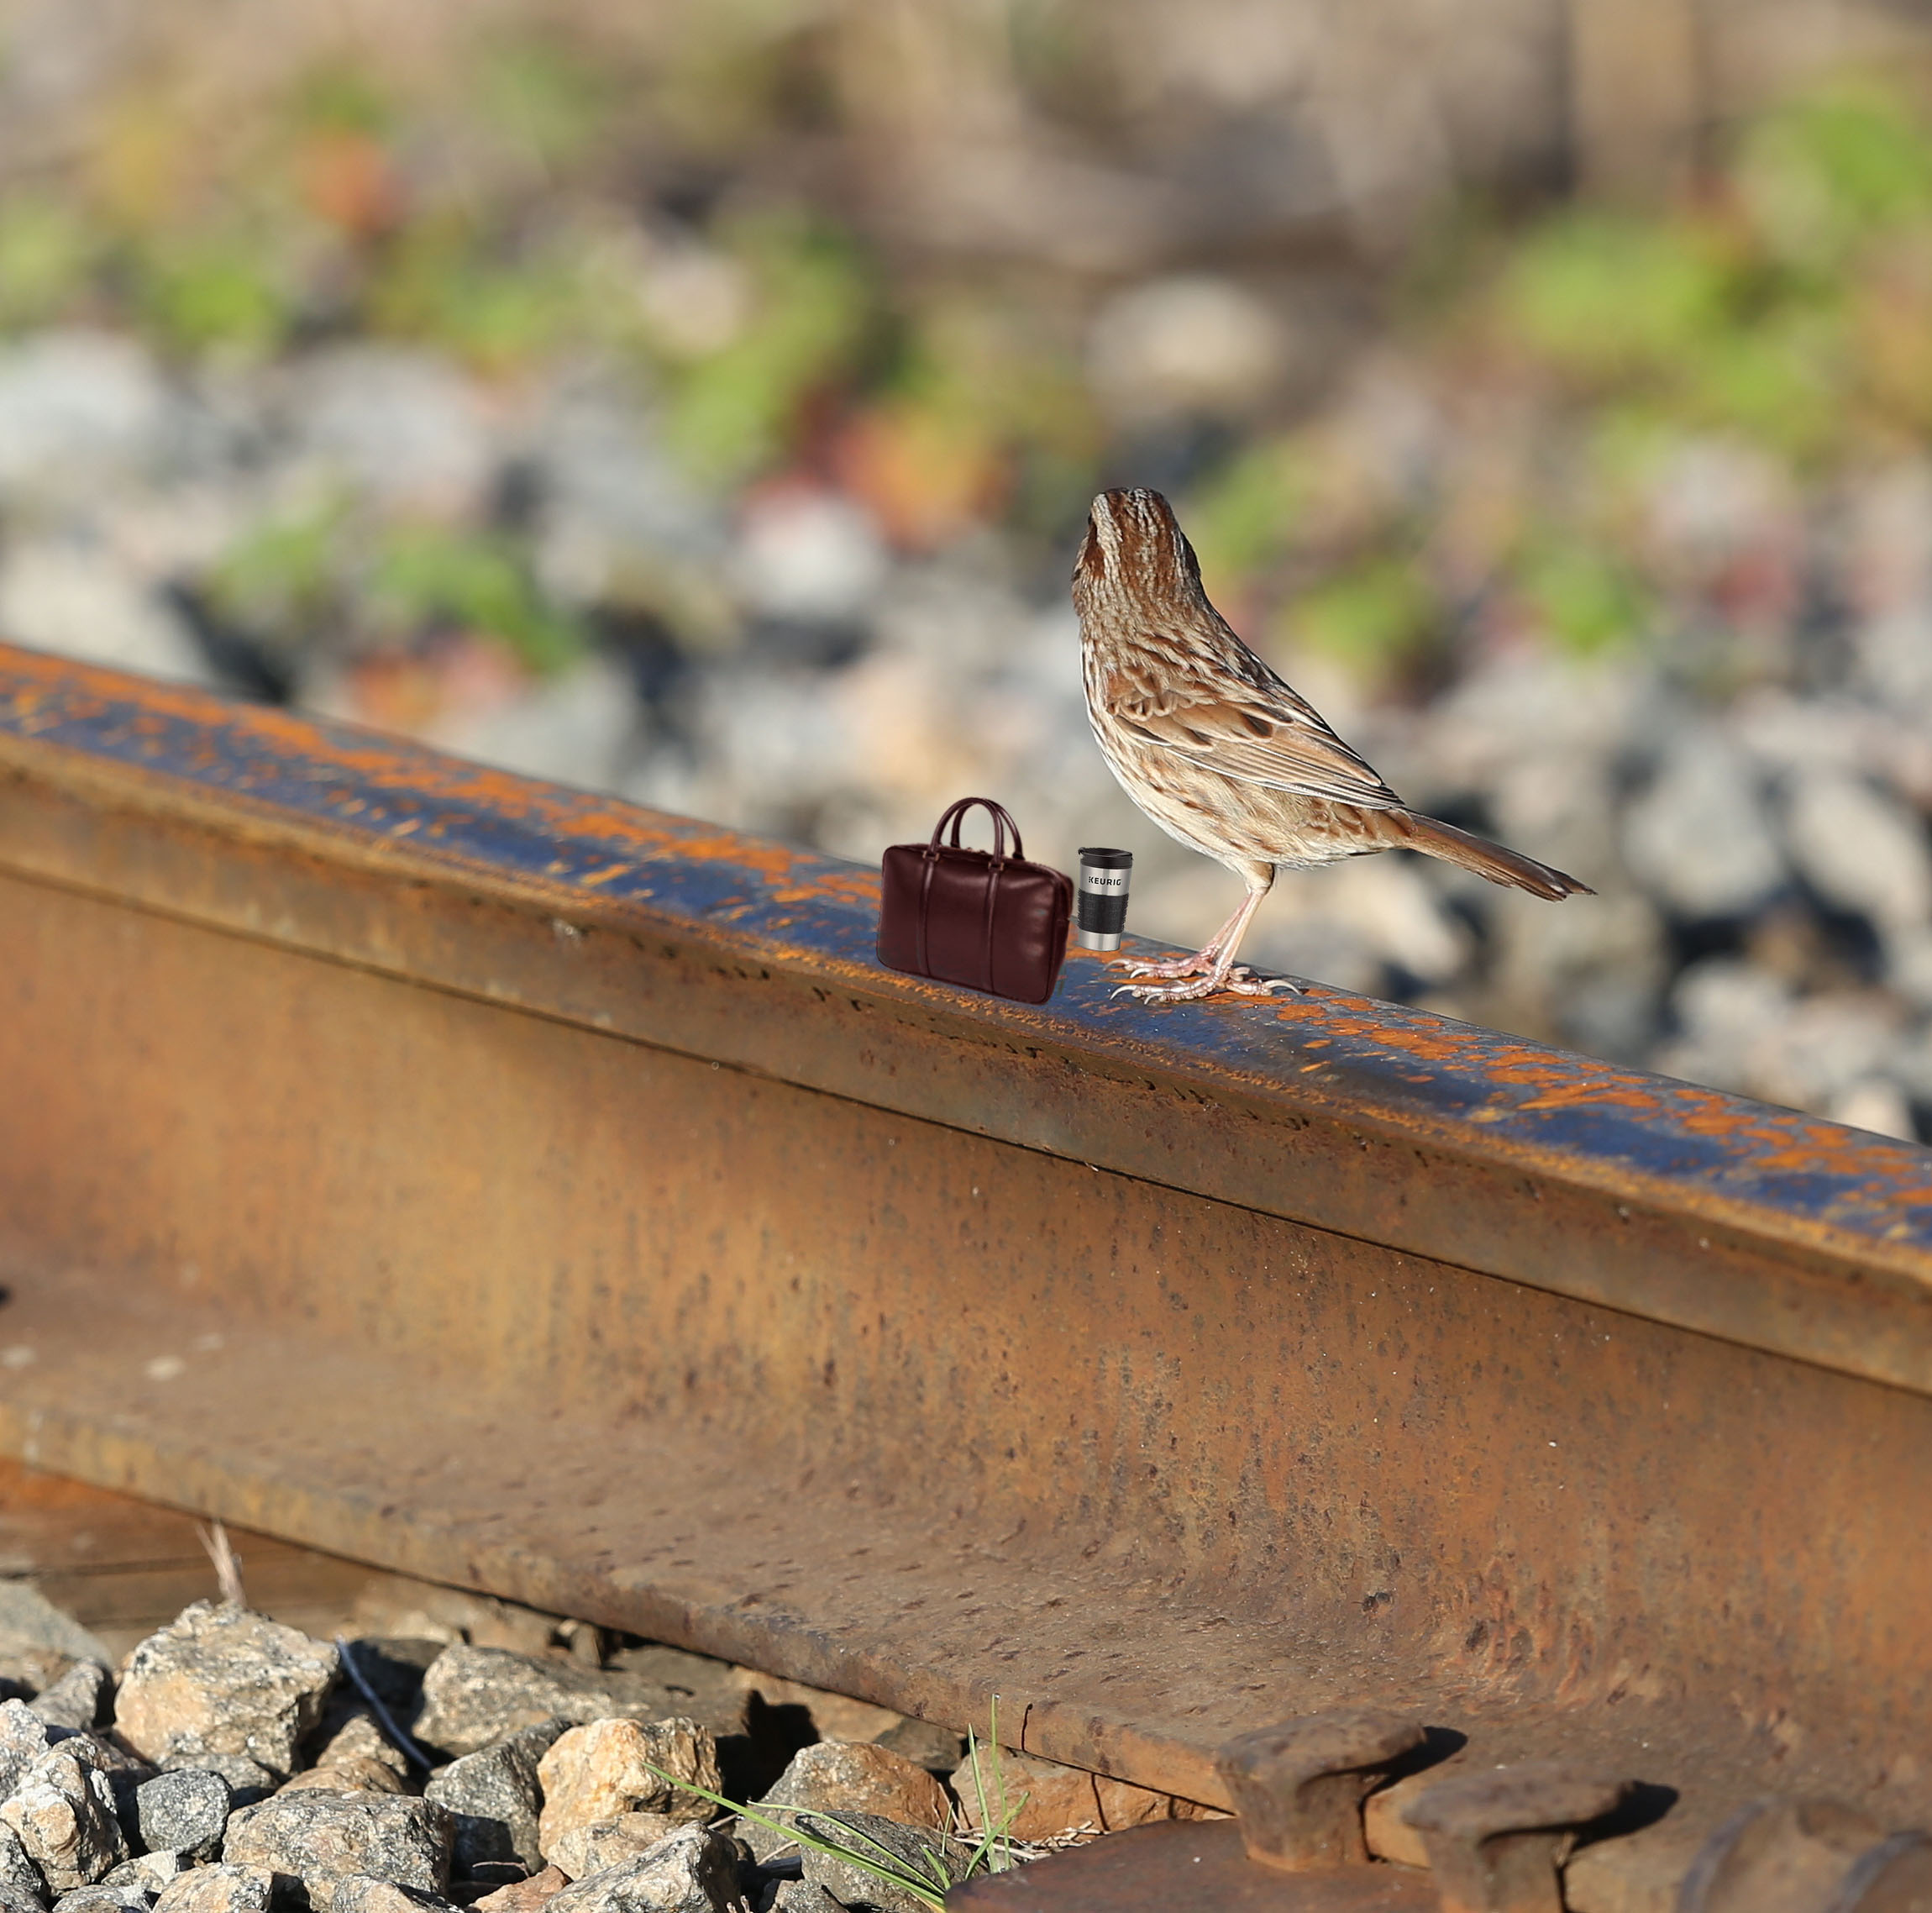 Song sparrow on a railroad track